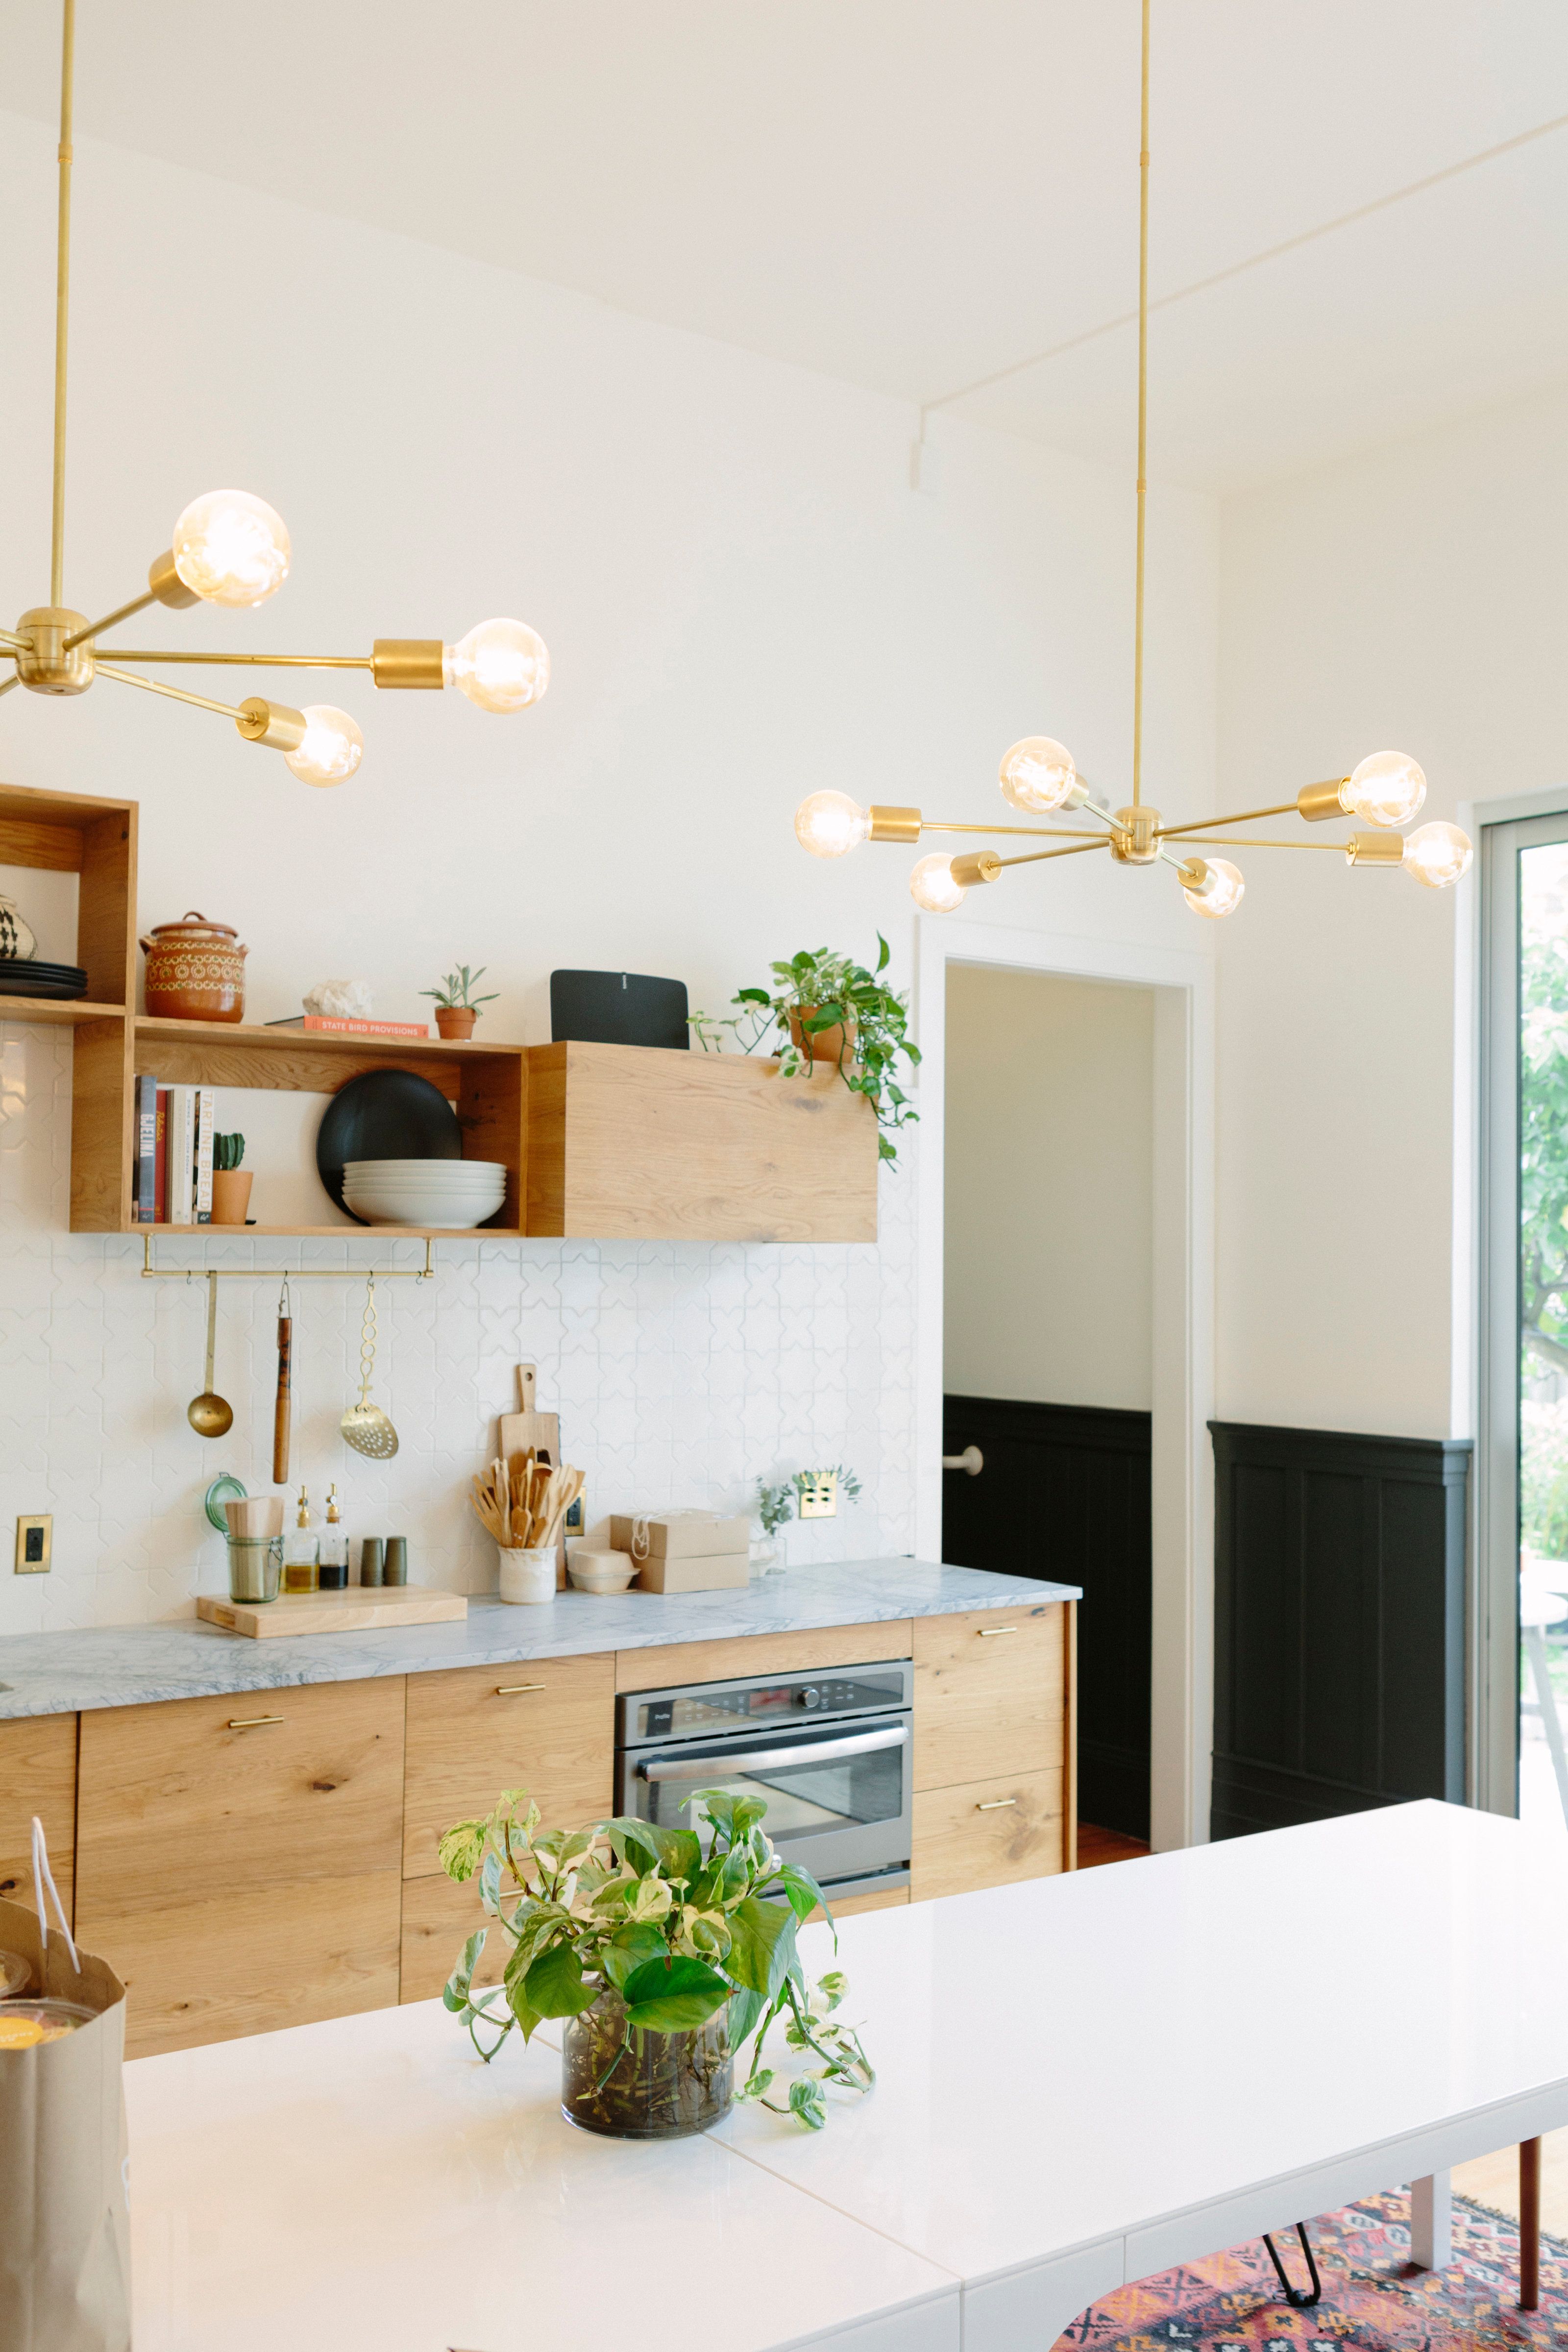 10 Cheap Ways to Update an Ugly Kitchen